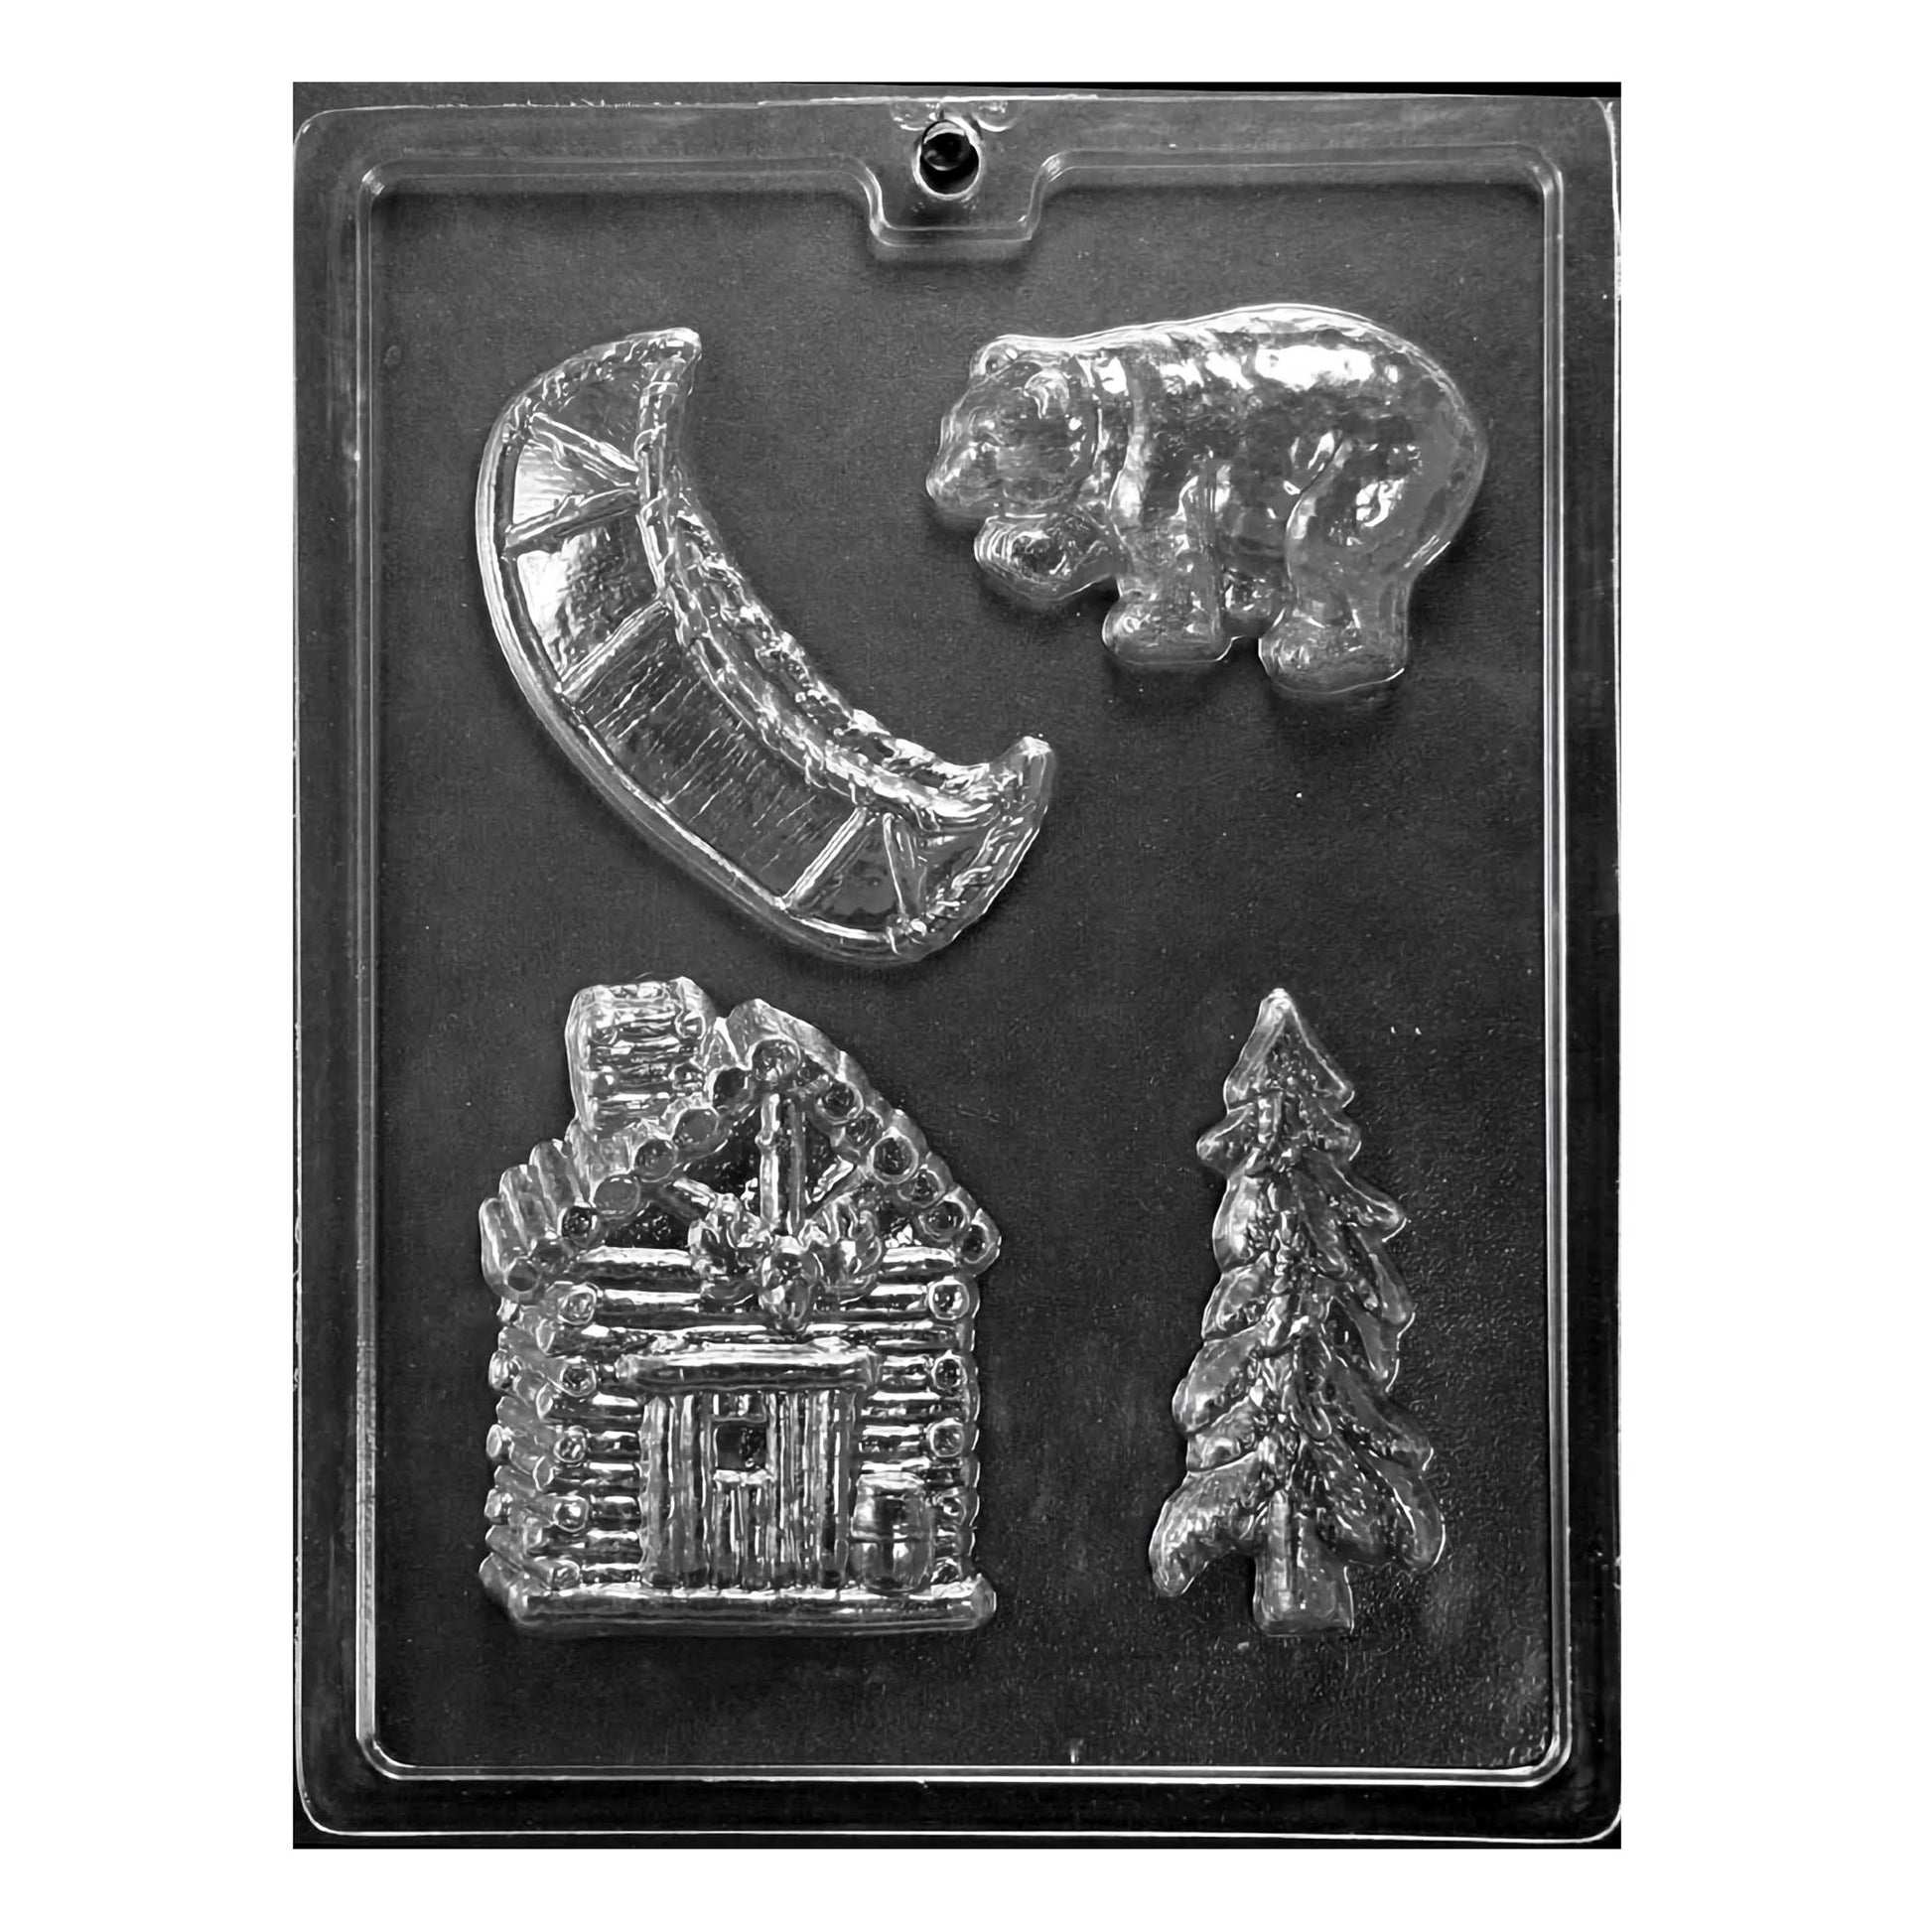 A detailed chocolate mold set themed around camping, featuring a crescent moon, a bear, a cabin, and a pine tree. The designs are deeply embossed for a realistic appearance, ideal for creating themed chocolates for camping enthusiasts or outdoor-related events.